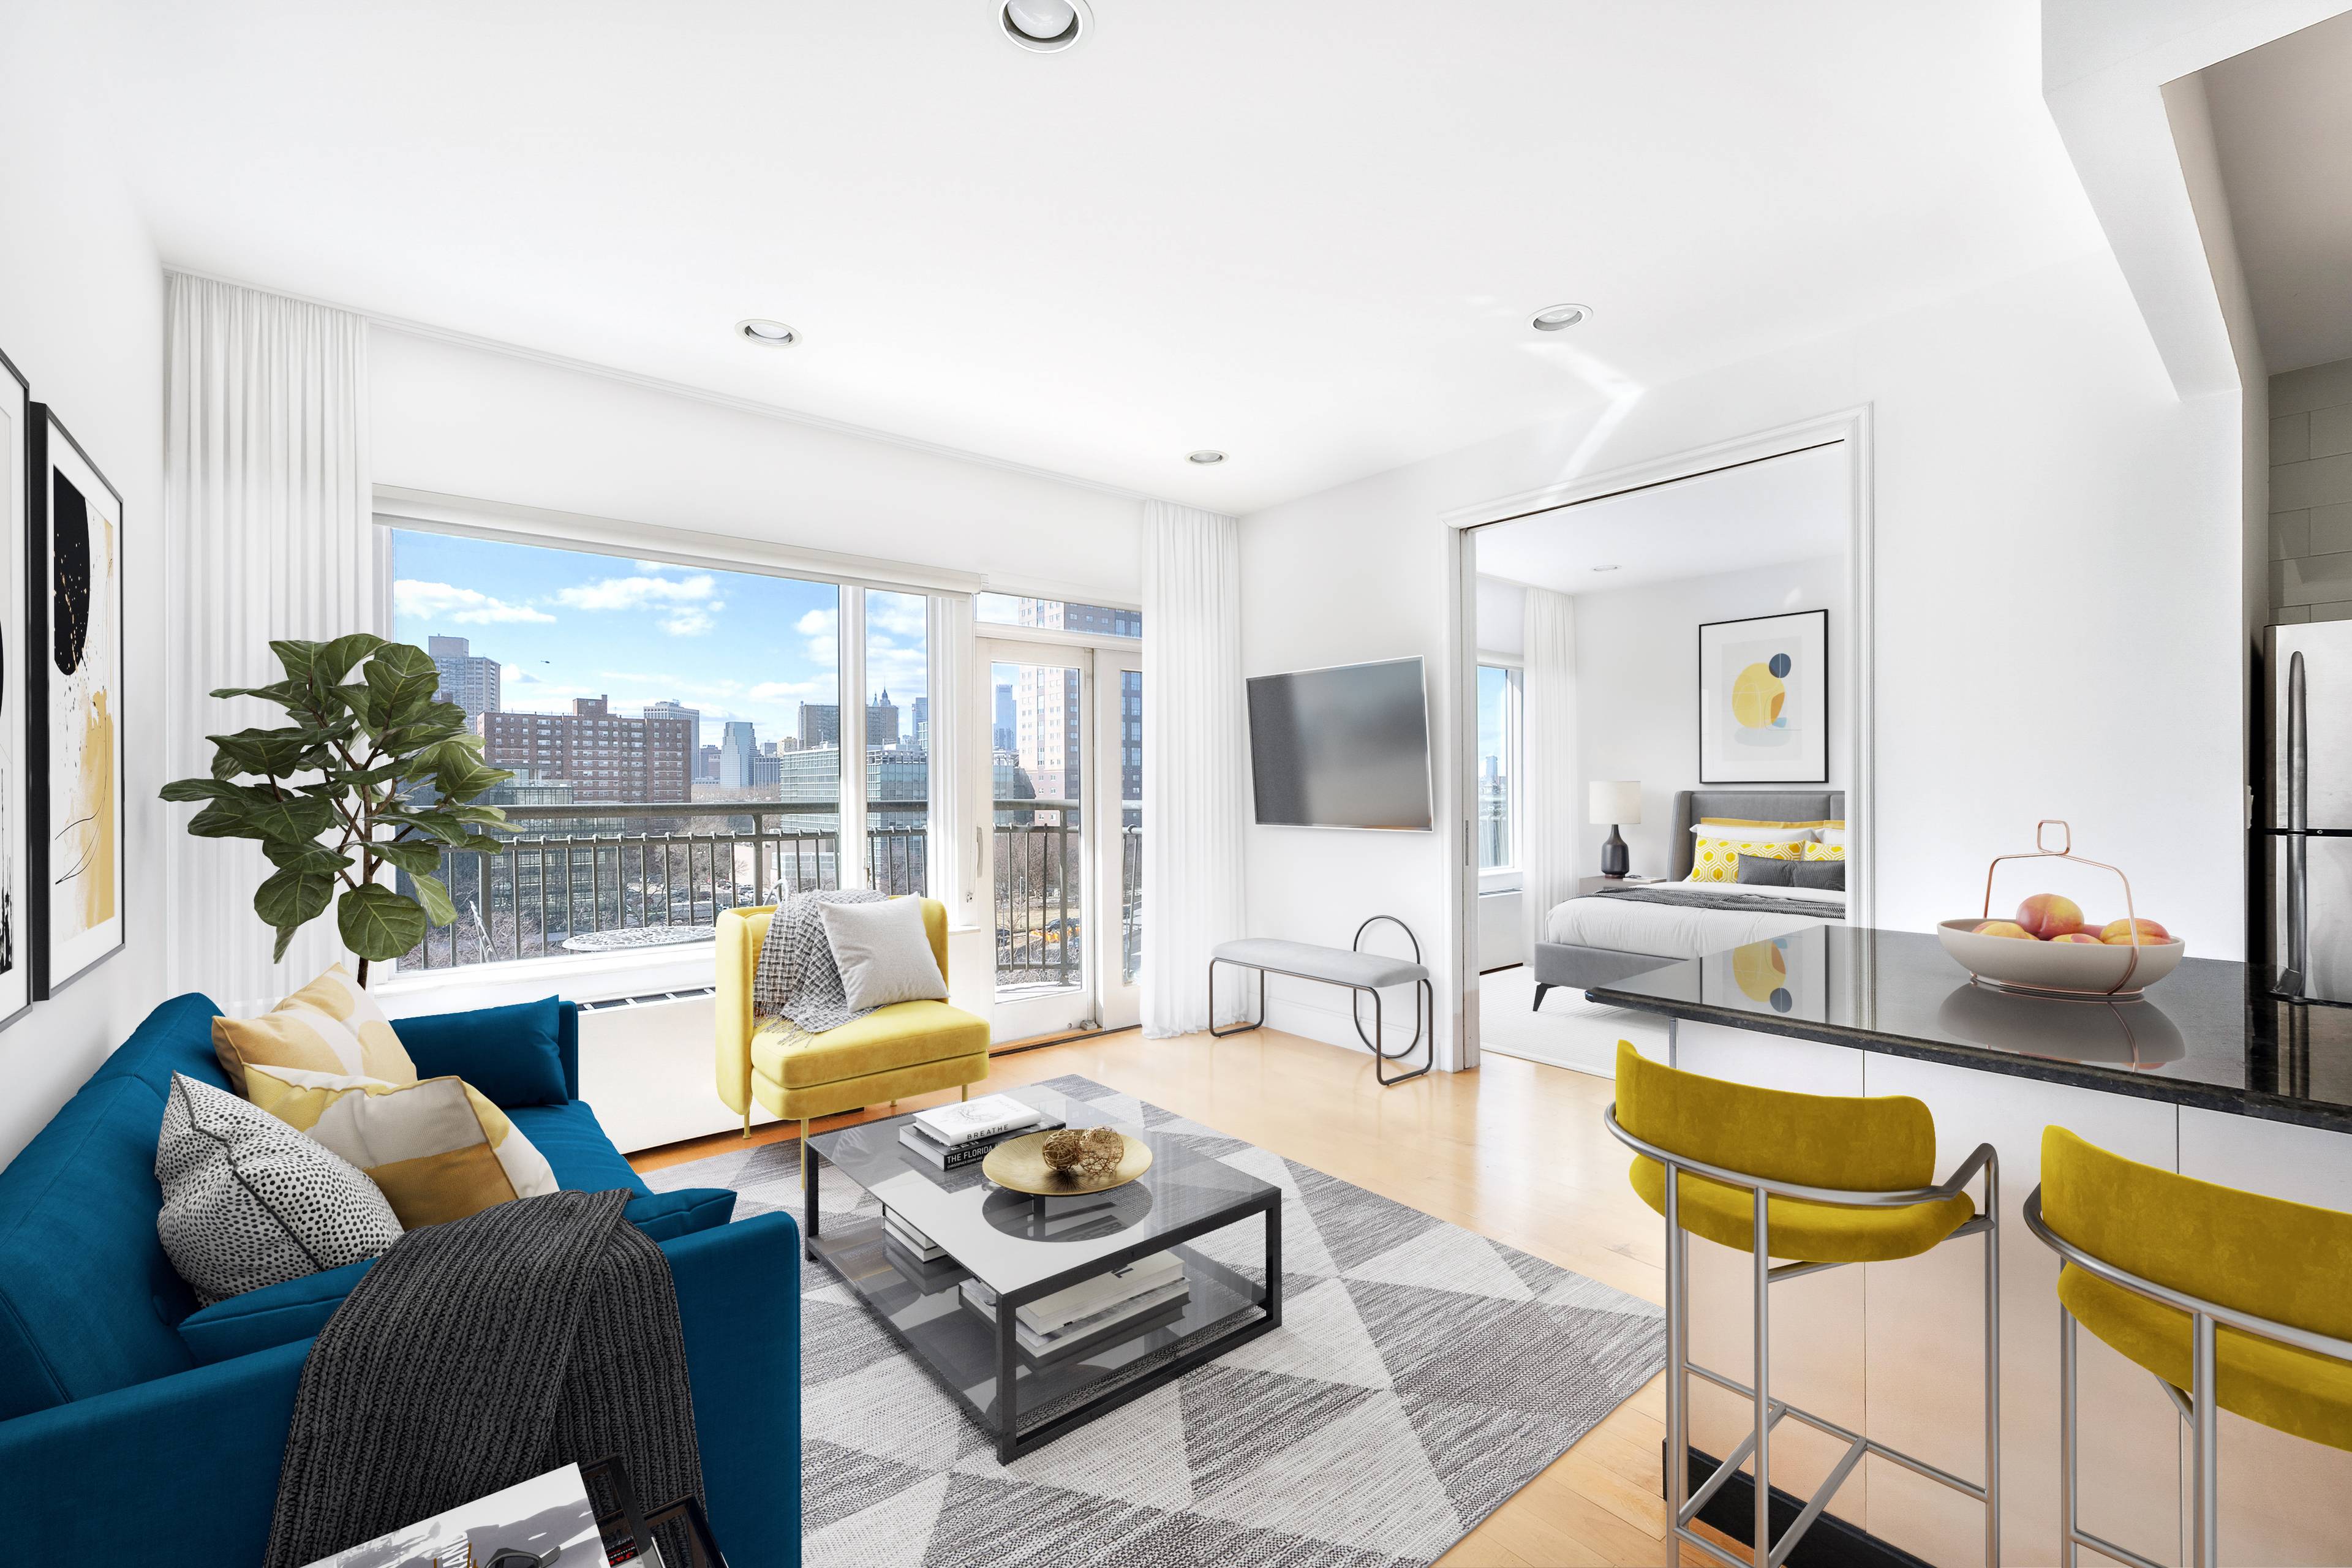 This stunning split two bedroom, two bathroom apartment in the heart of Downtown Brooklyn is priced to sell at under 1, 120PPSF.